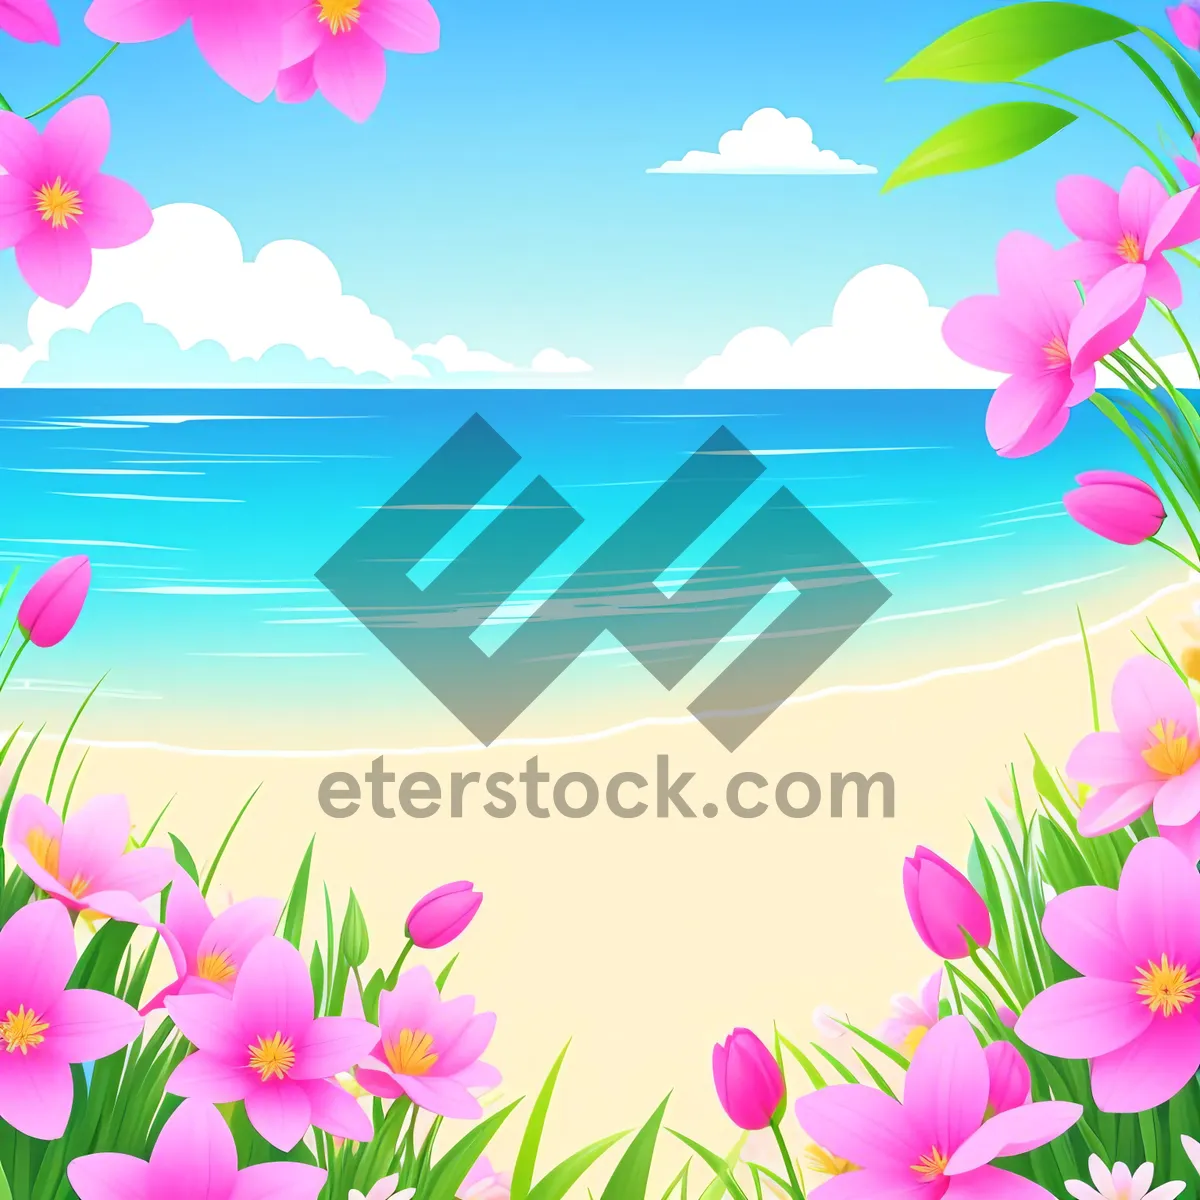 Picture of Colorful Floral Tulip: Vibrant Spring Design with Pink Flowers